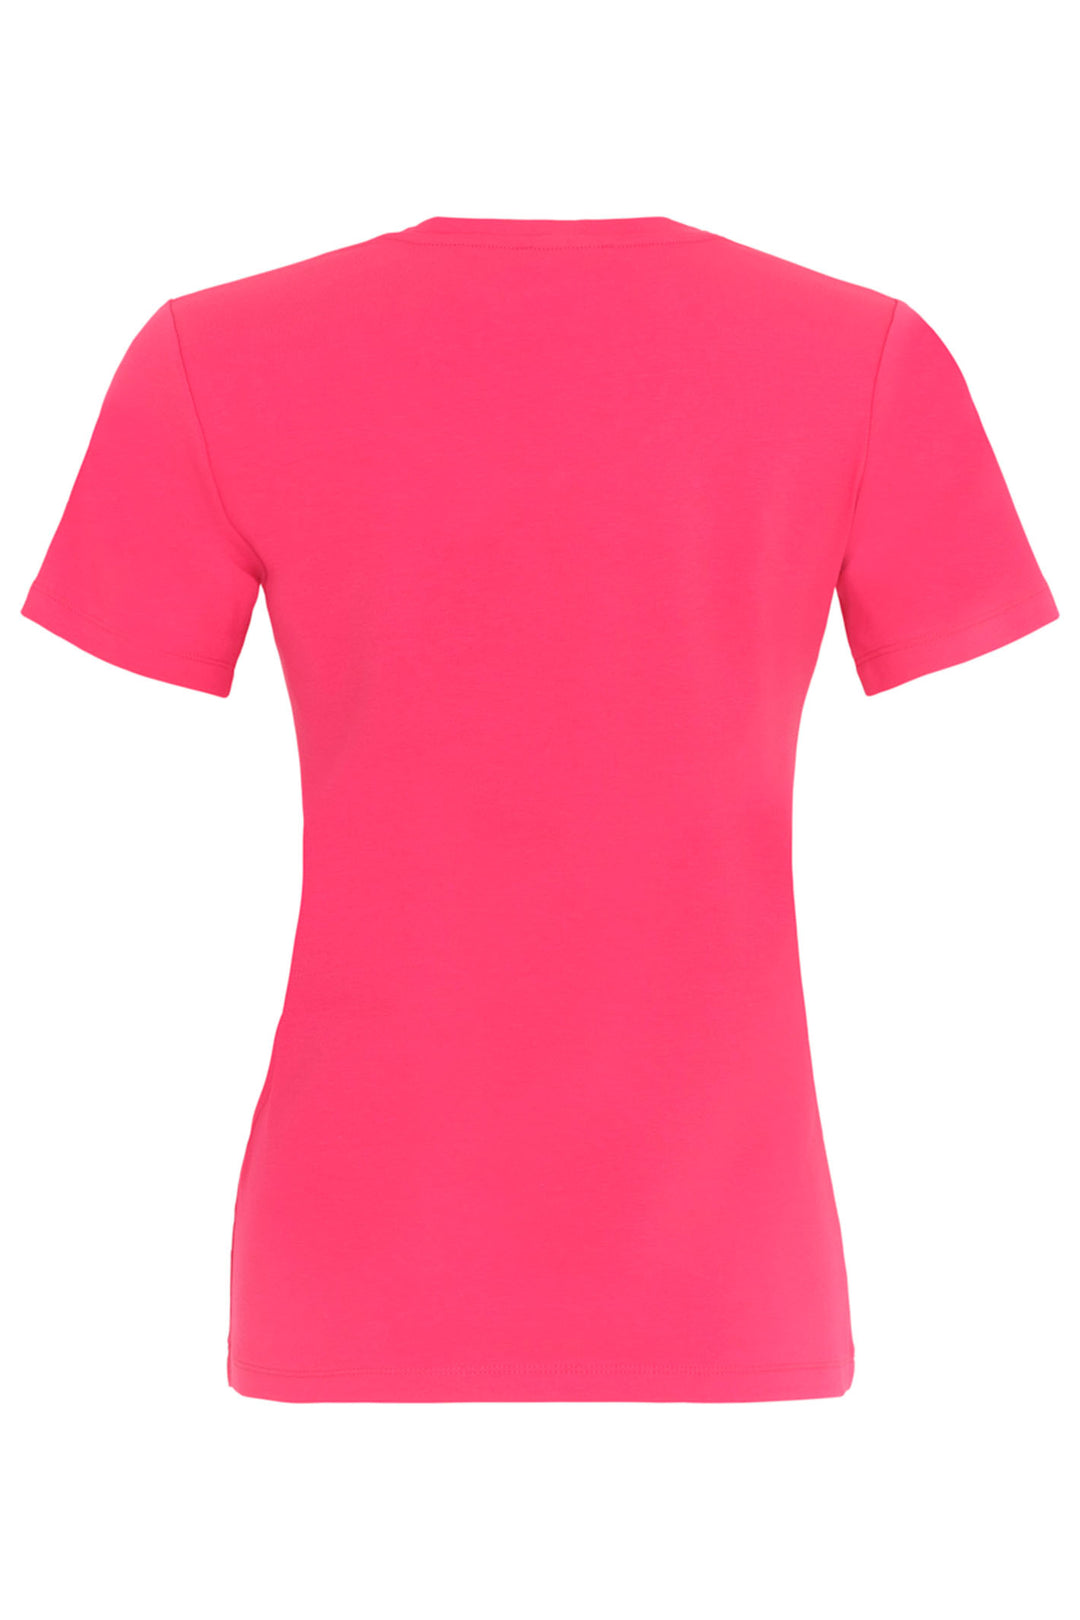 Dolcezza 24500 Fuchsia Pink T-Shirt Top - Dotique Chesterfield